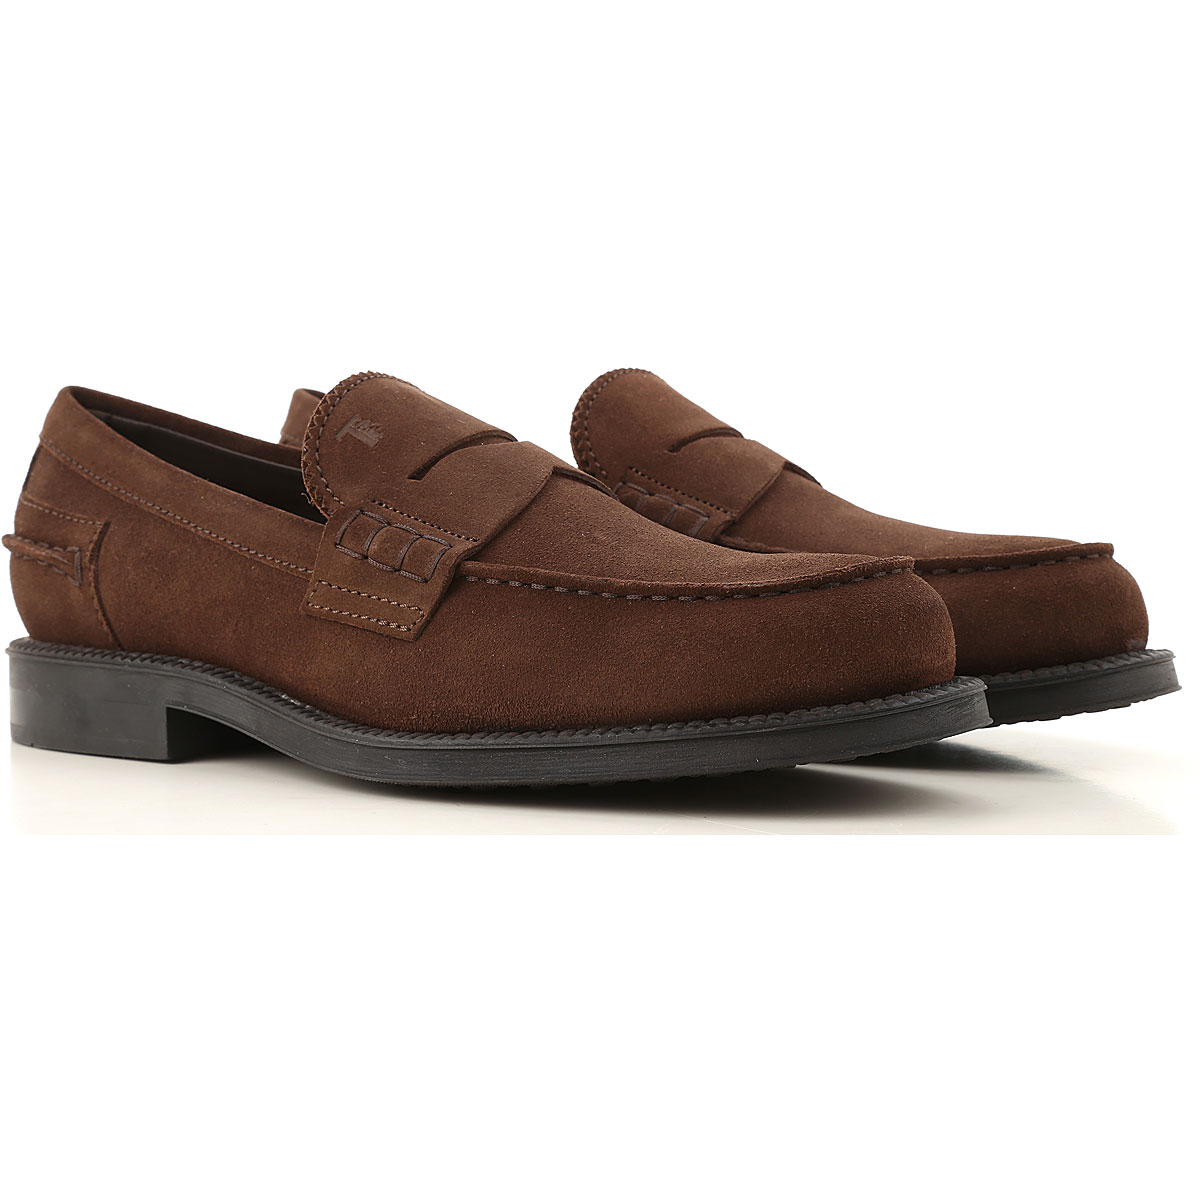 Mens Shoes Tods, Style code: xxm80b0br30hses804--